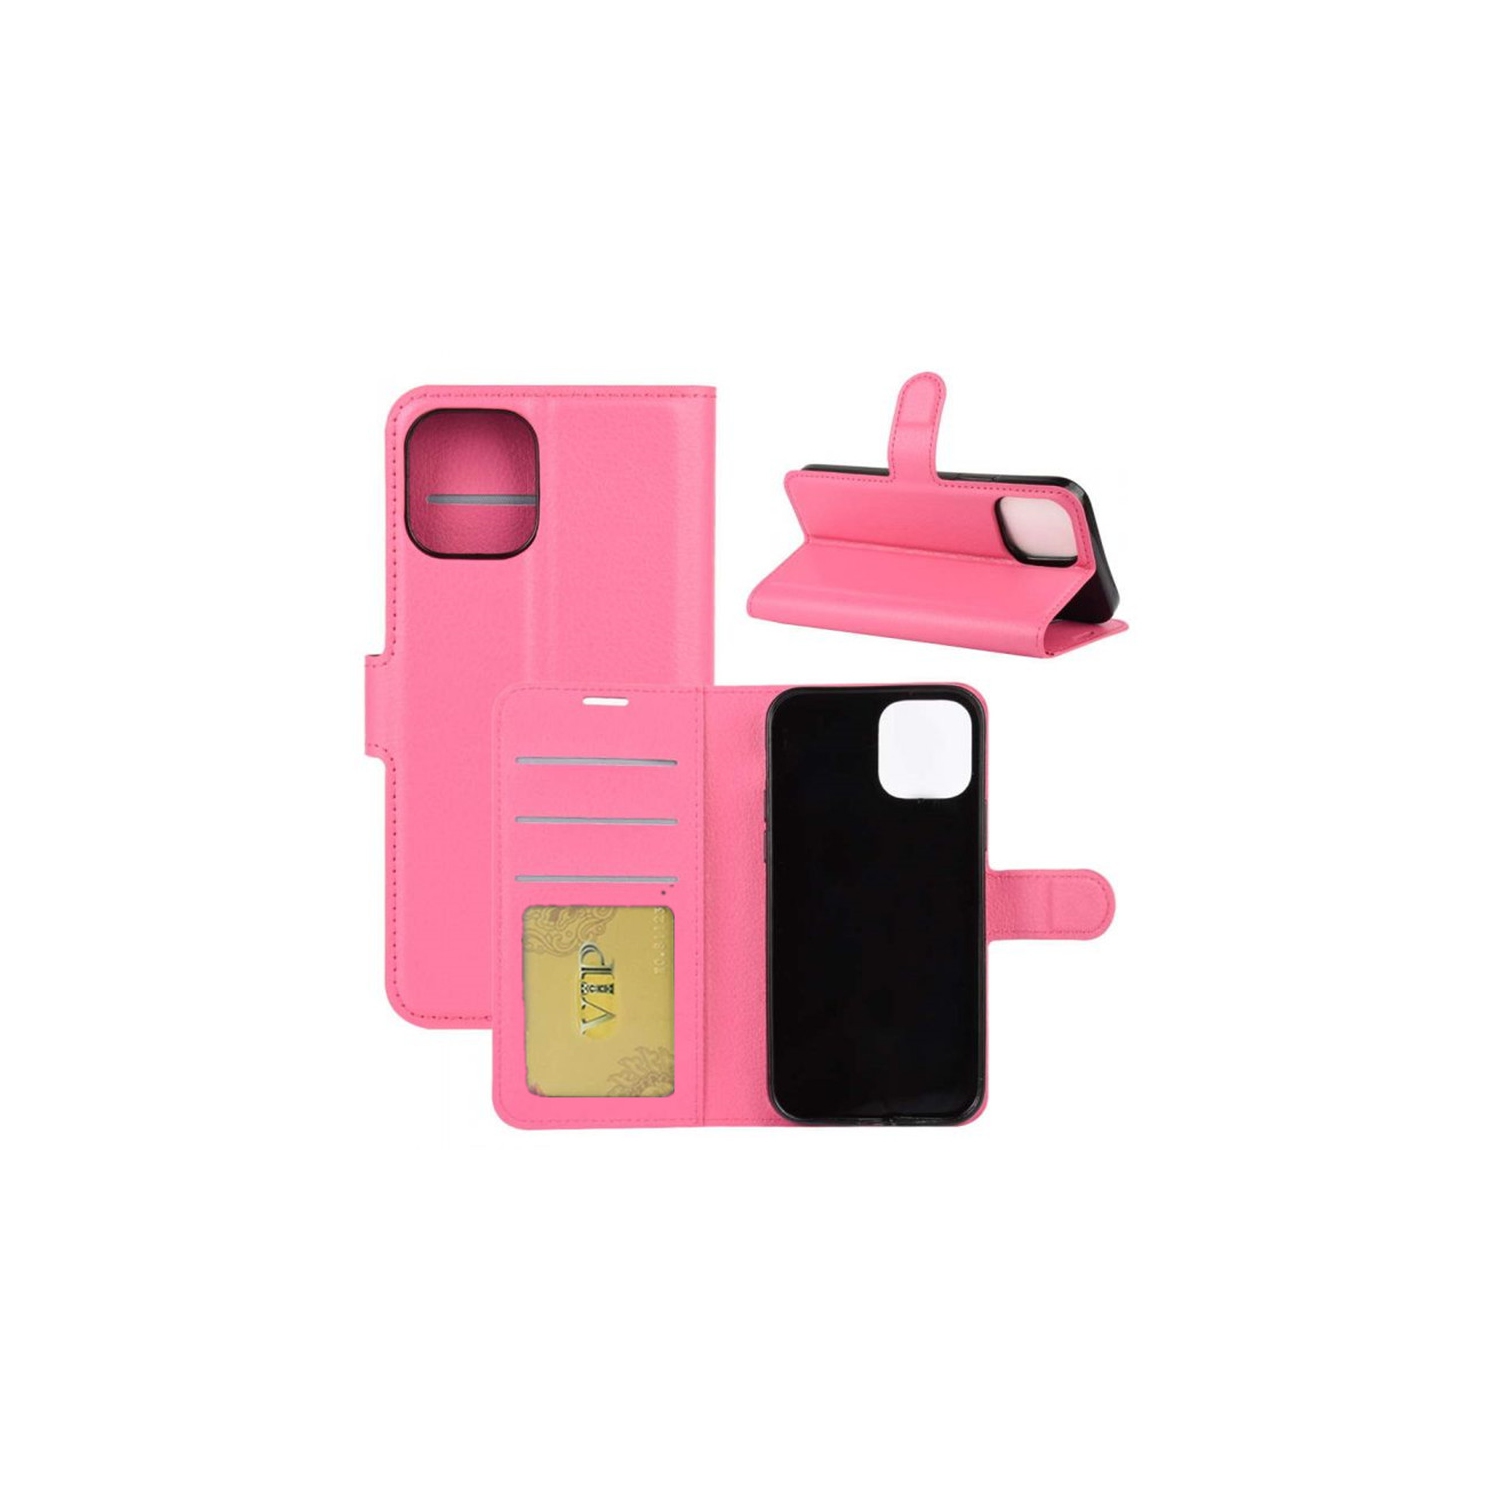 【CSmart】 Magnetic Card Slot Leather Folio Wallet Flip Case Cover for iPhone 12 Mini (5.4"), Hot Pink